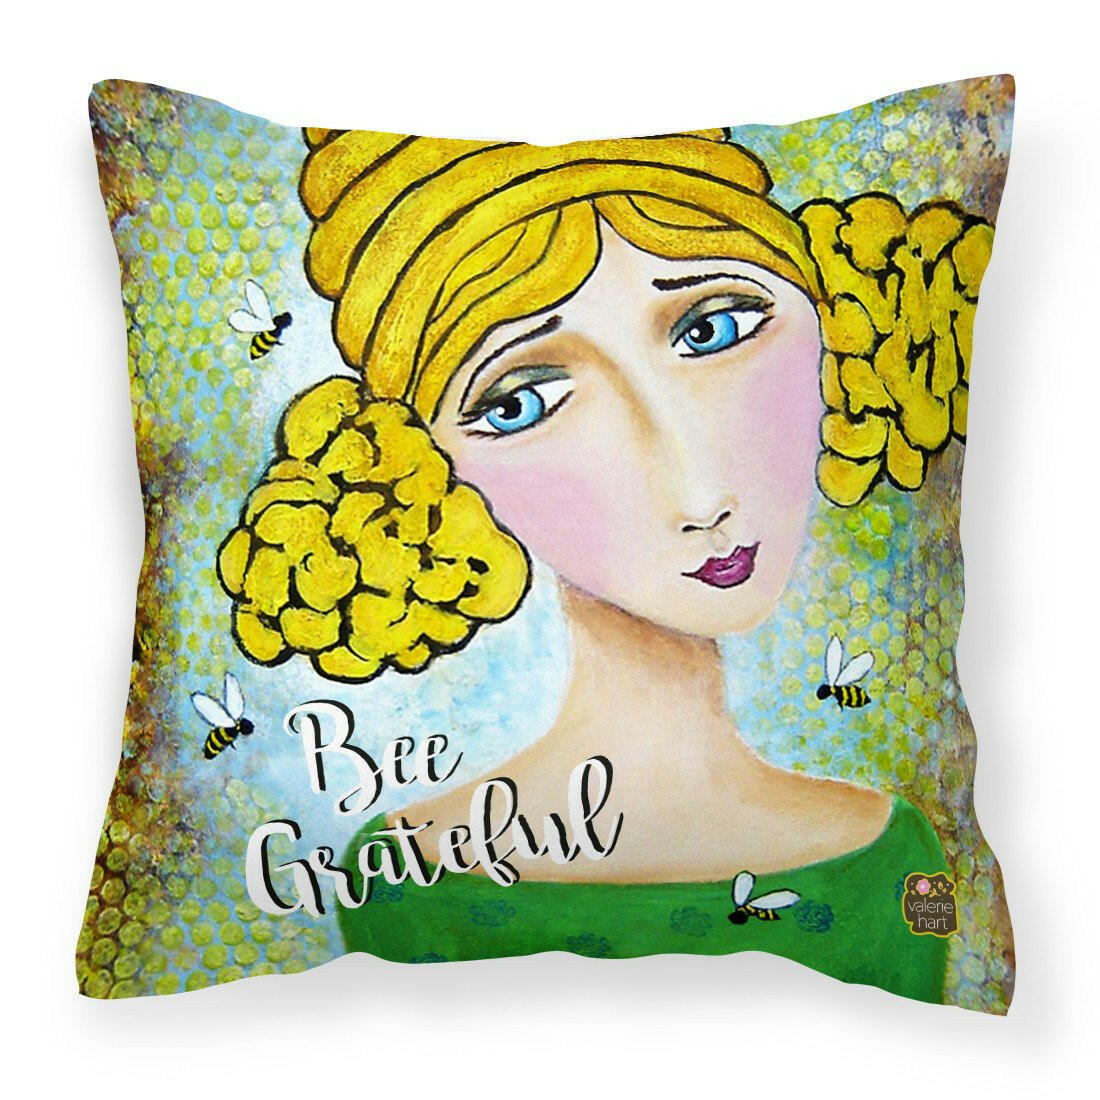 Bee Grateful Girl with Beehive Canvas Decorative Pillow VHA3008PW1414 by Caroline's Treasures